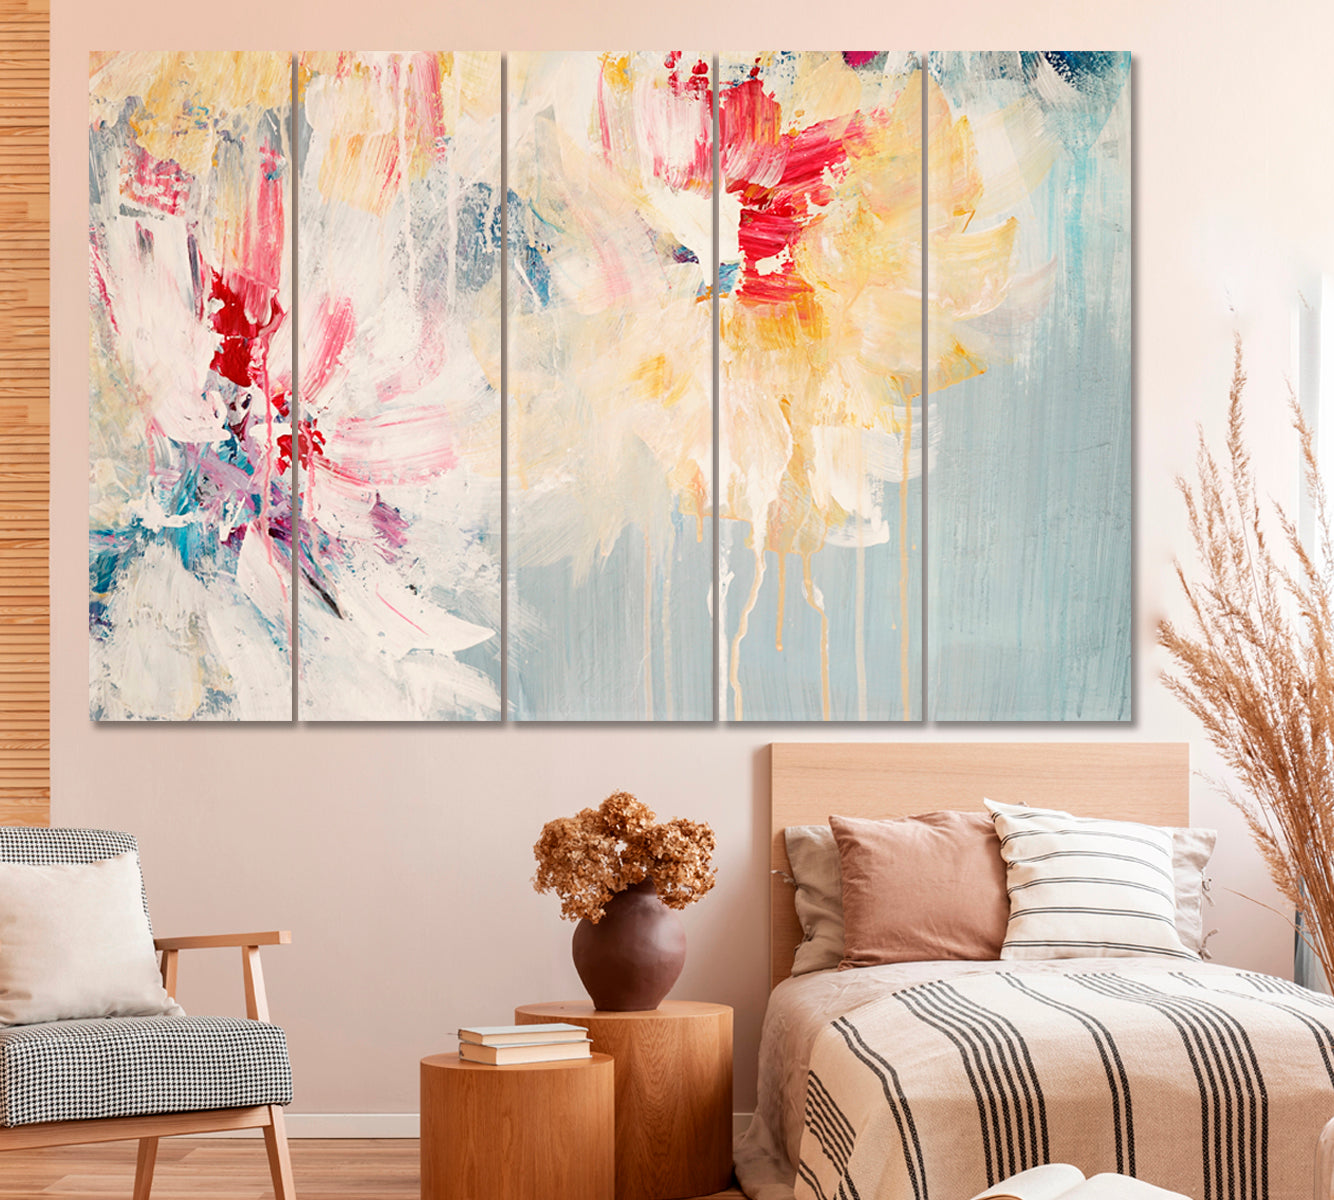 FINE ART Modern Abstract Colorful Acrylic on Canvas Artwork Floral Style Canvas Print Fine Art Artesty 5 panels 36" x 24" 